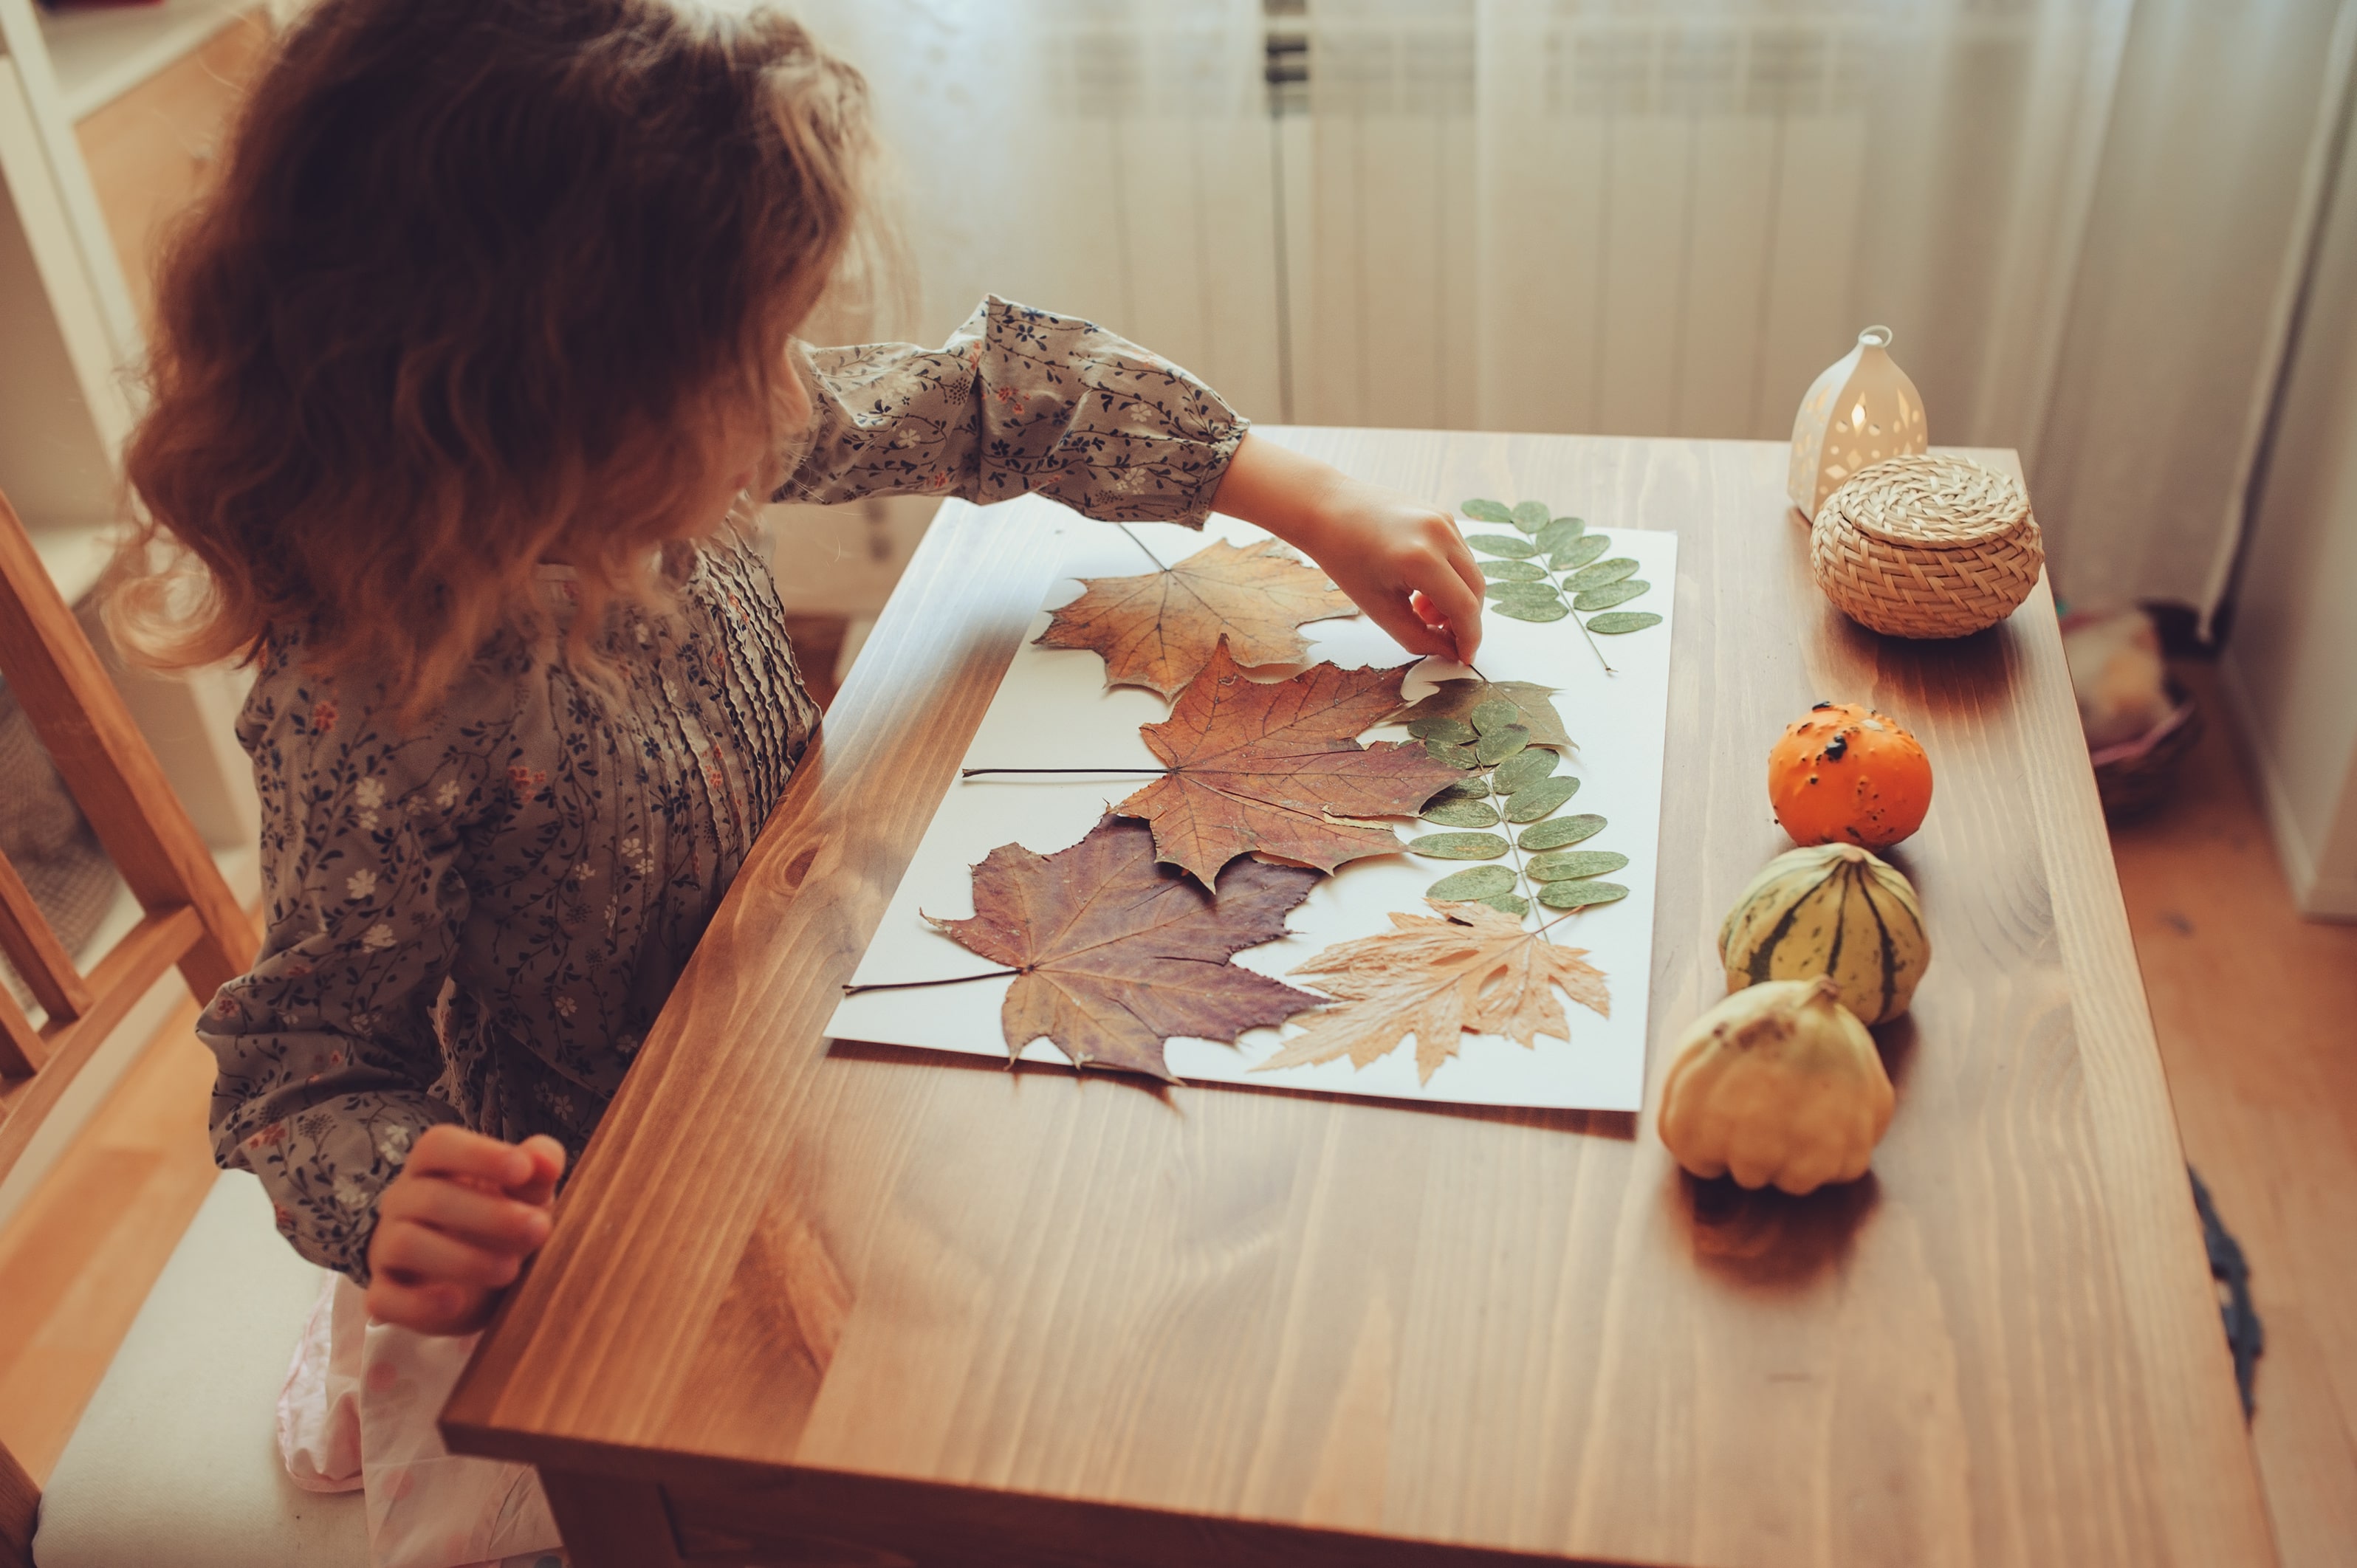 A little girl sticking autumn leaves onto a piece of plain paper to create a collage